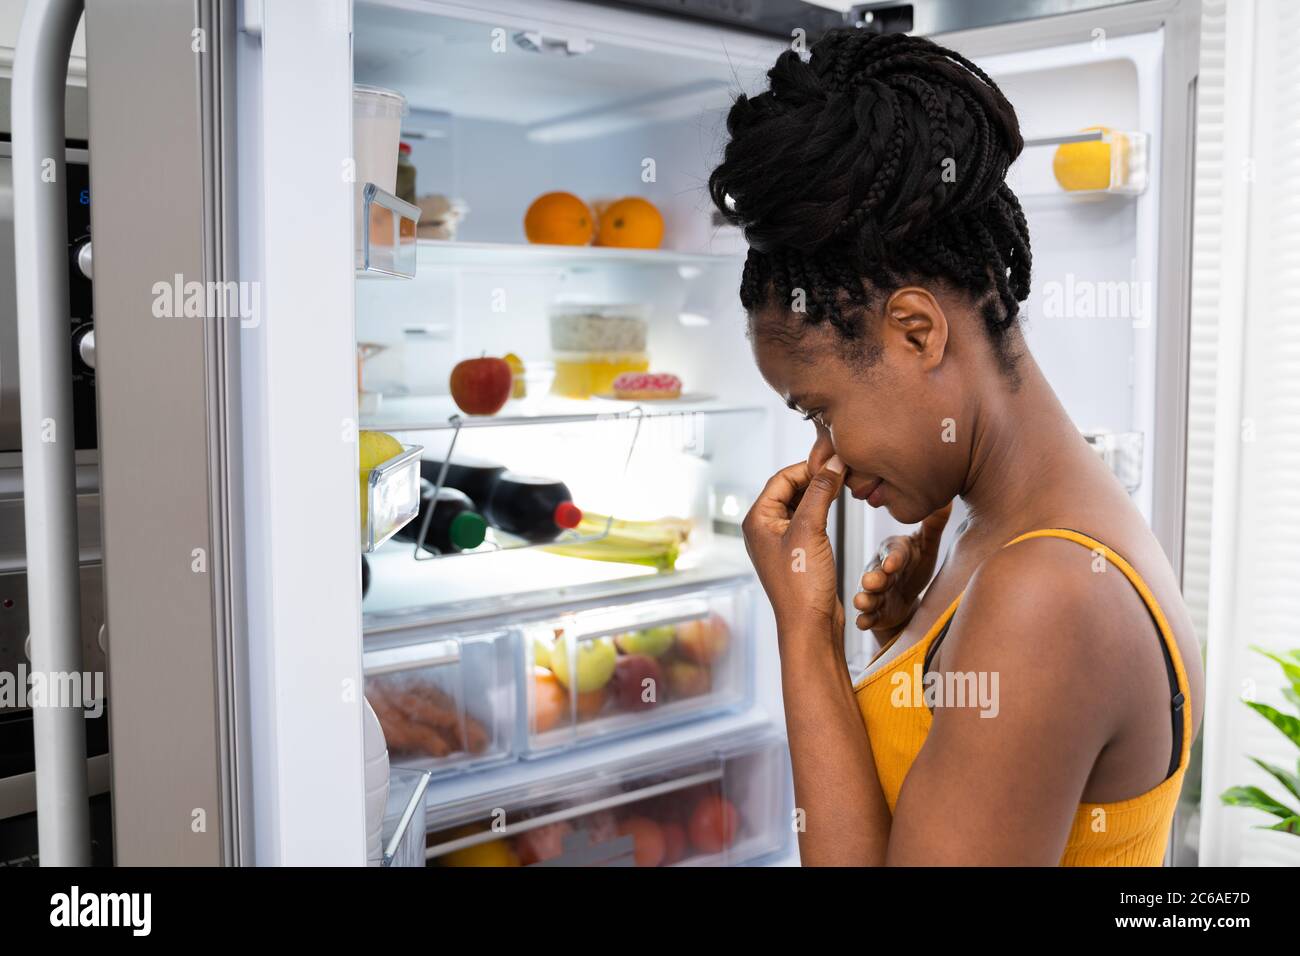 Rotten Fruit Bad Smell In Open Fridge Or Refrigerator Stock Photo